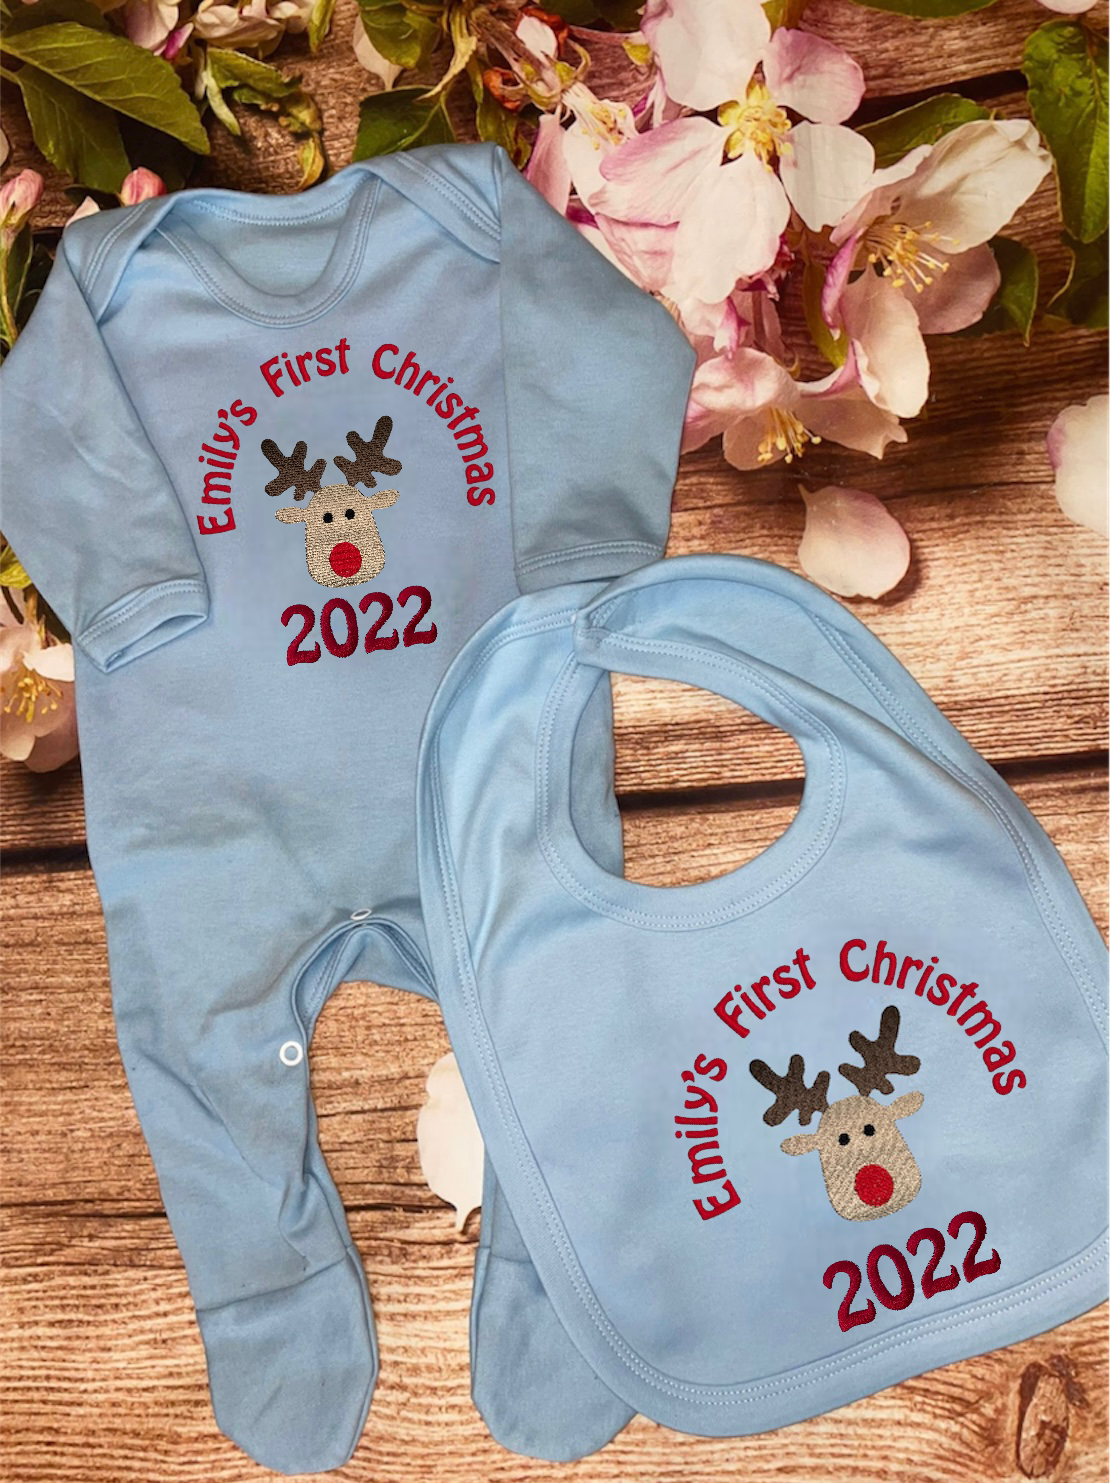 First Christmas bib / baby grow sleepsuit, embroidered & personalised with name. Choice of designs. Keepsake gift